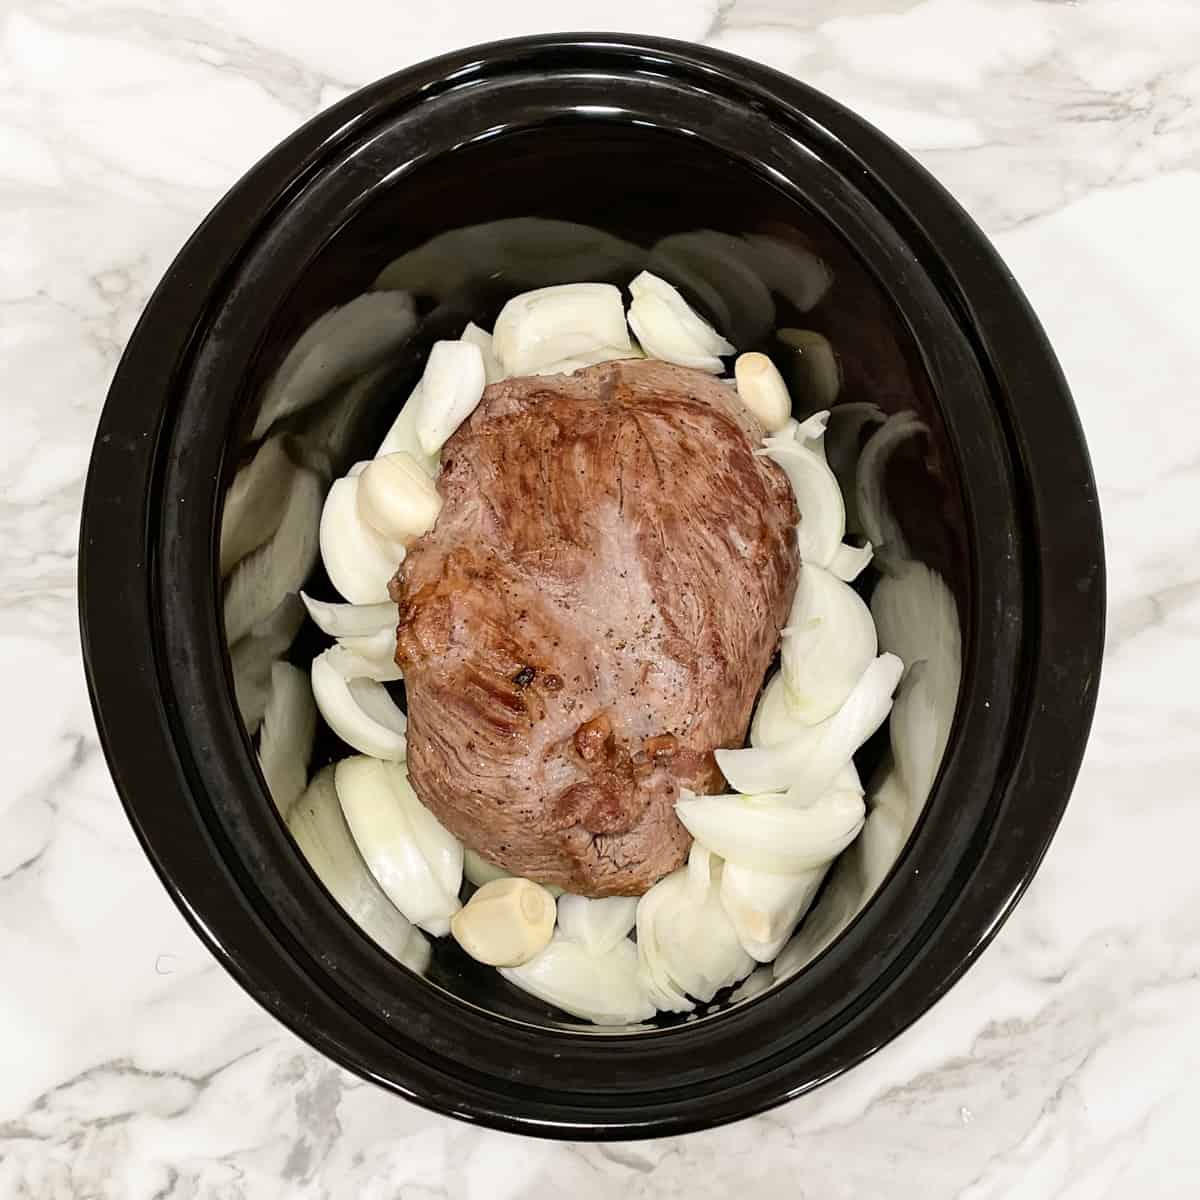 add ingredients to slow cooker